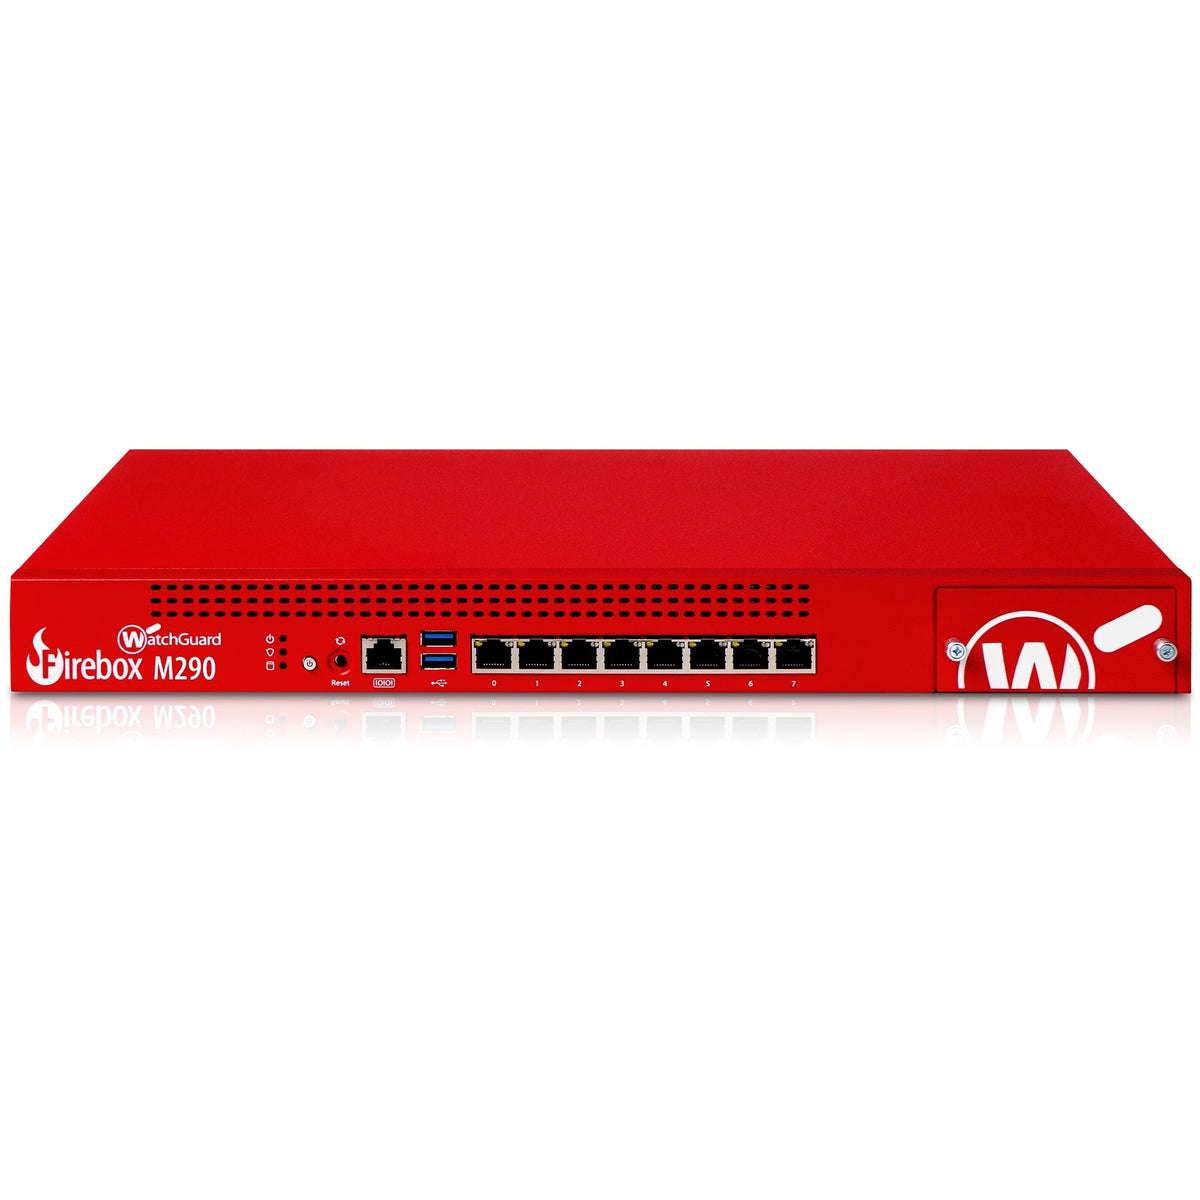 Trade up to WatchGuard Firebox M290 with 3-yr Total Security Suite - WGM29002103